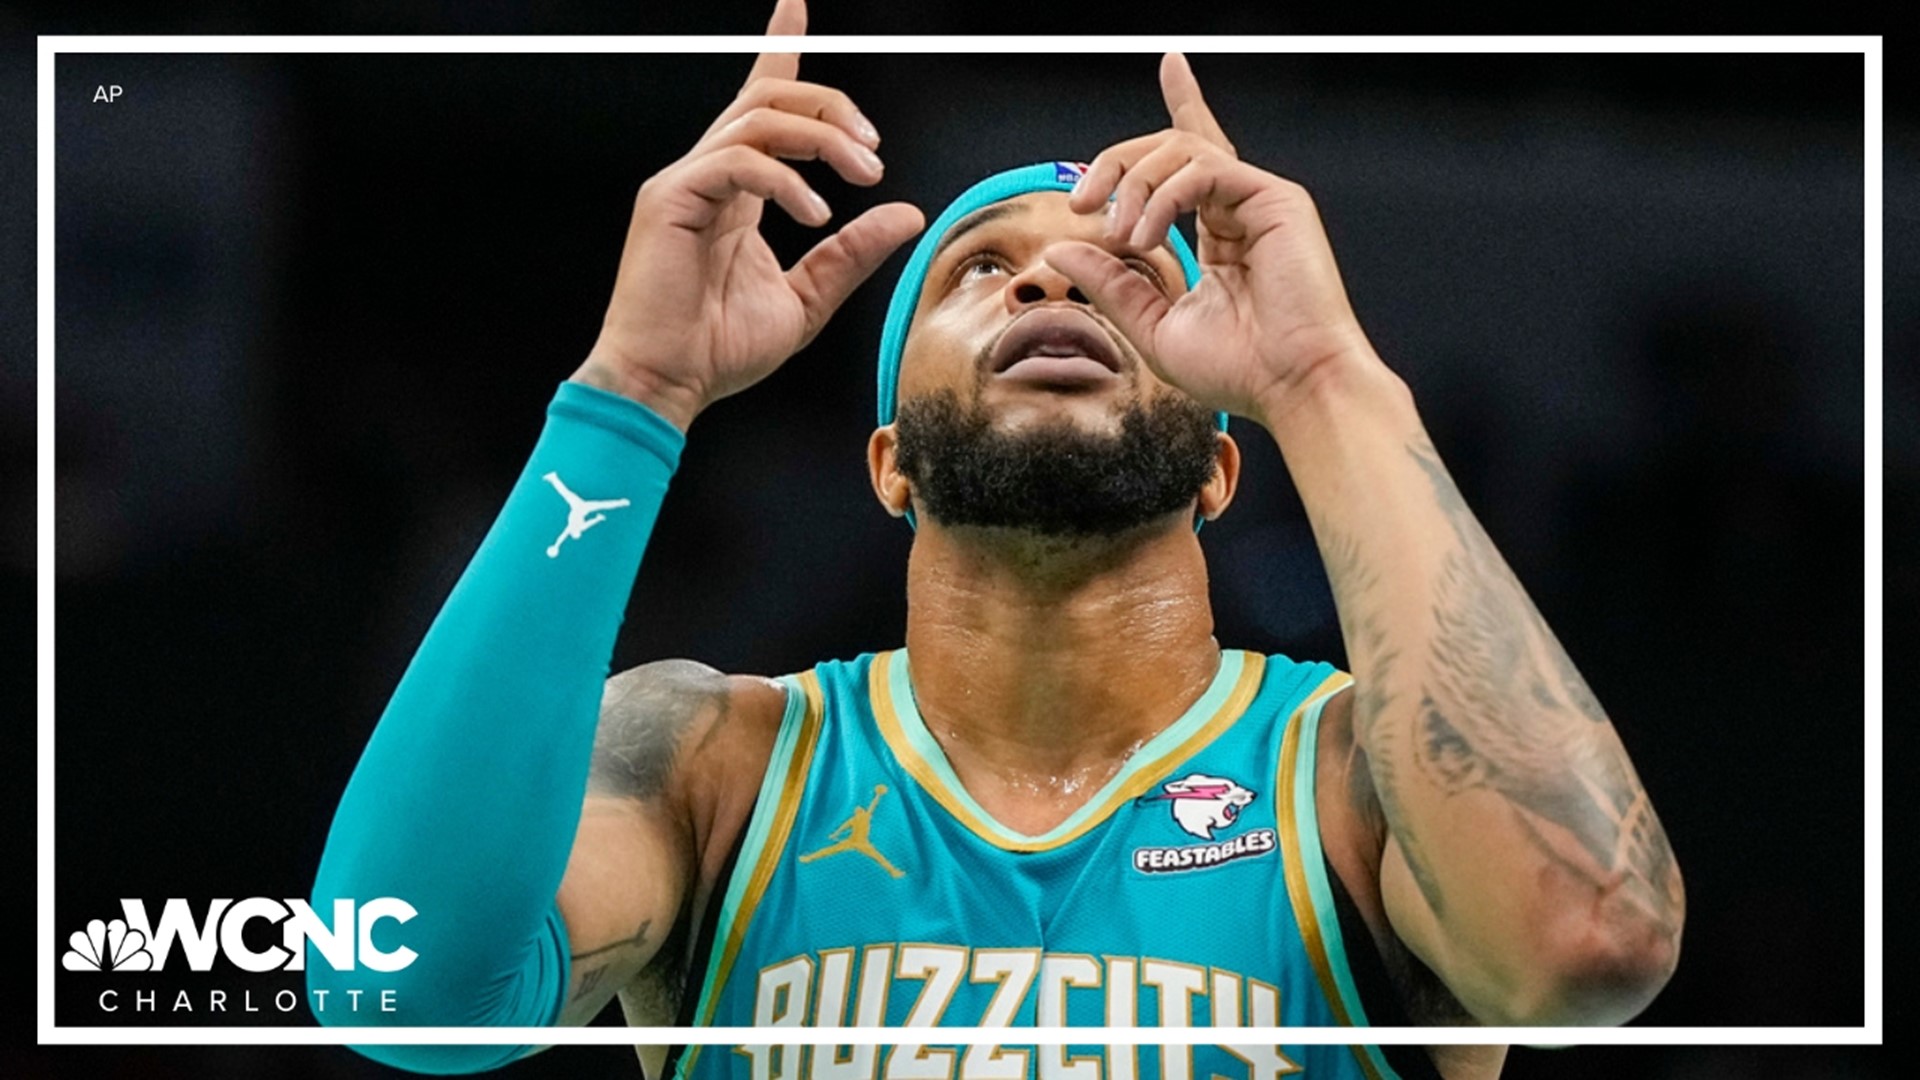 Bridges returned to play with the Hornets after his suspension expired, yet still faces domestic violence allegations.